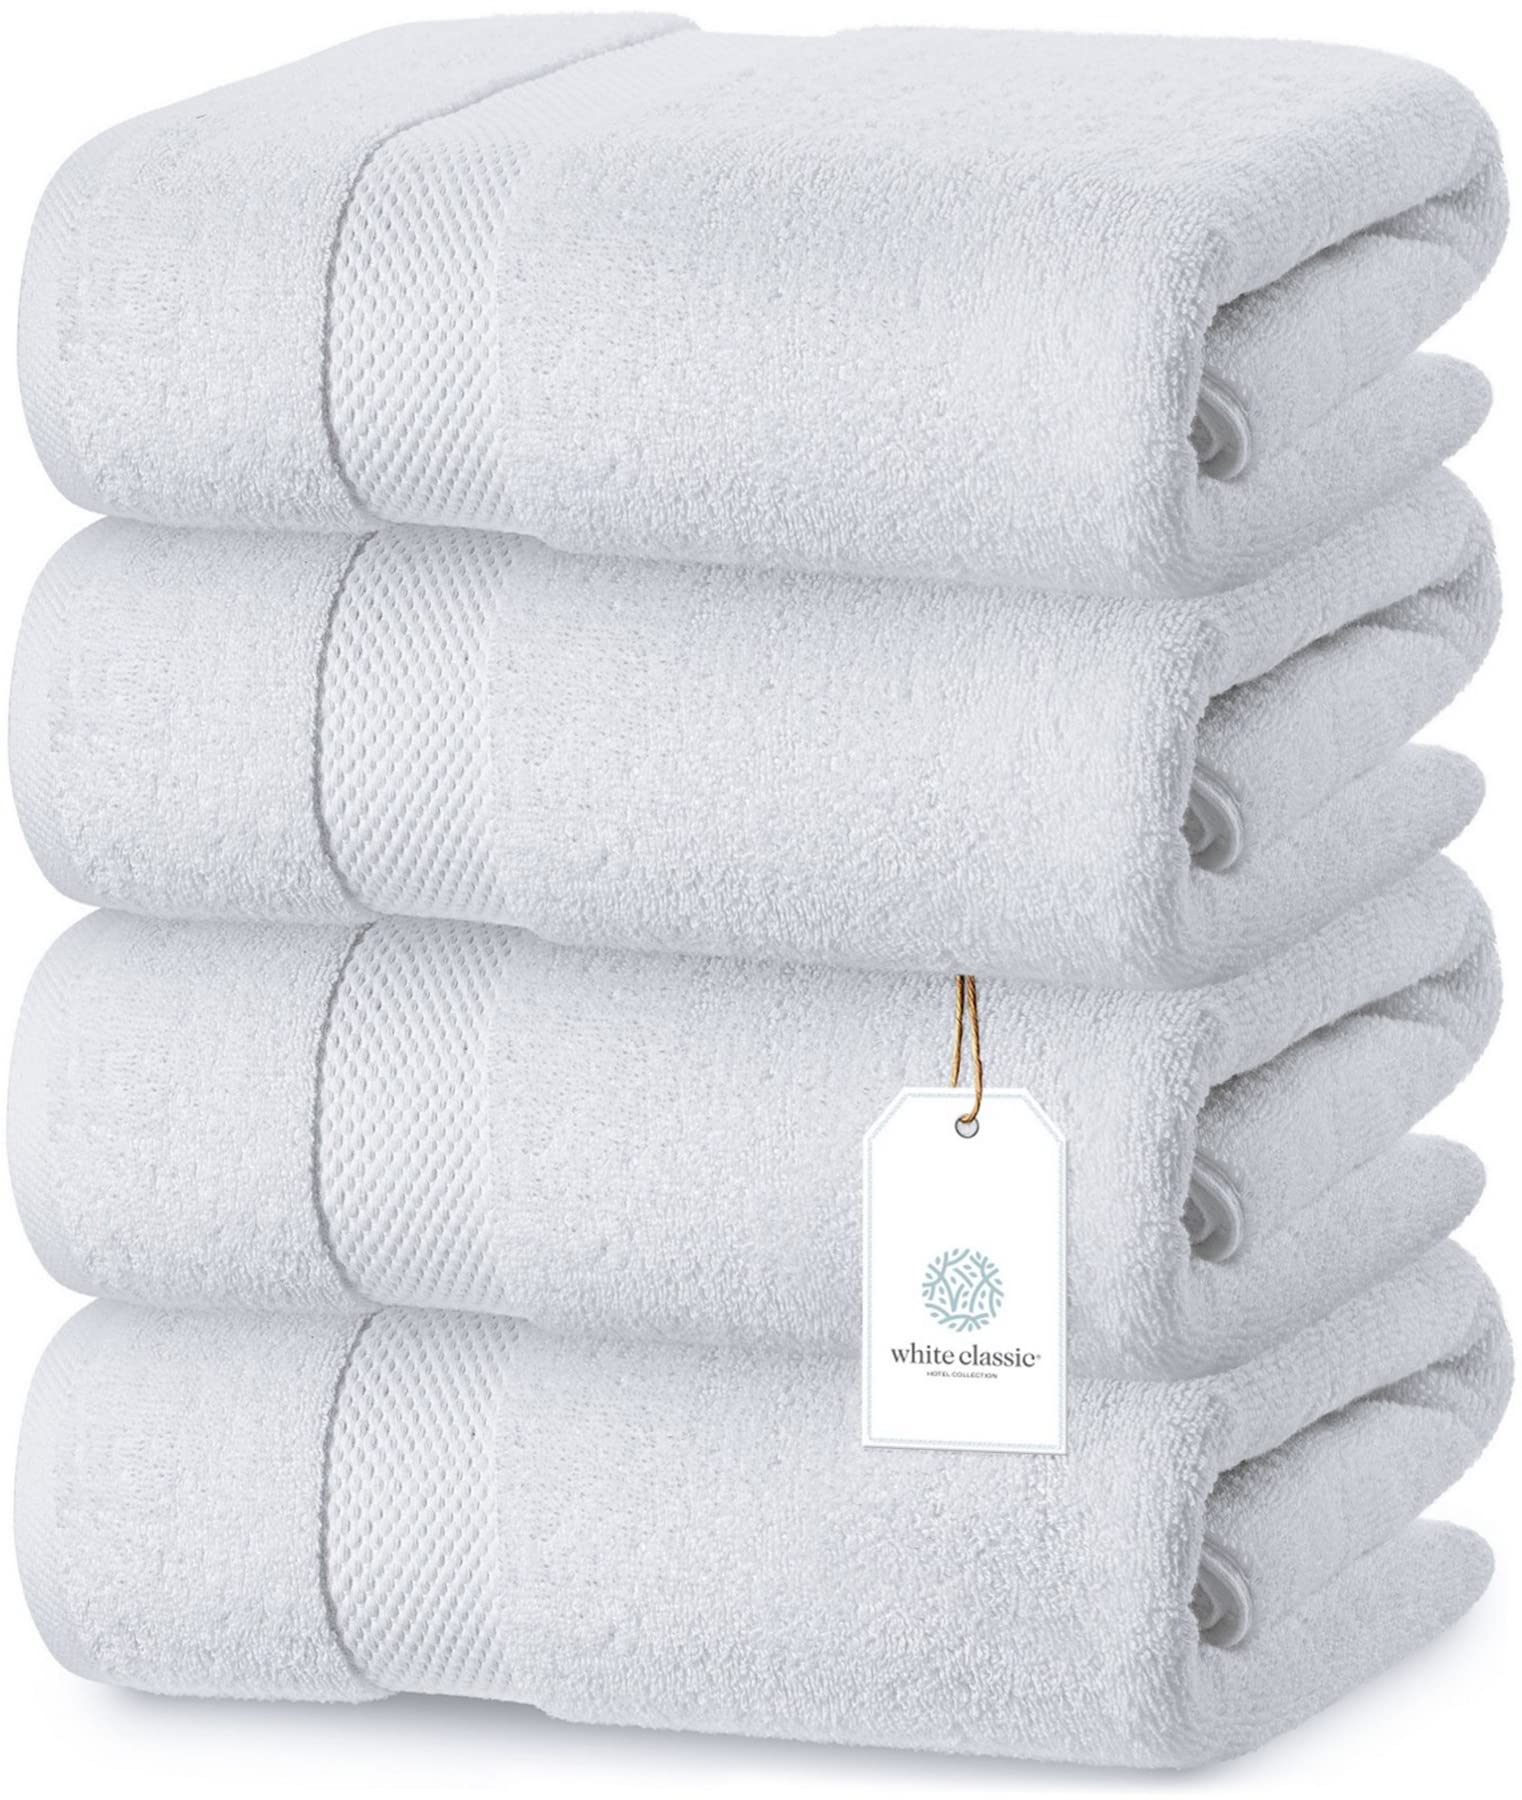 Luxury White Bath Towels Extra Large | 100% Soft Cotton 700 GSM Thick 2Ply Absorbent Quick Dry Hotel Bathroom Towel | 27x54 Inch | White | Set of 4  - Like New